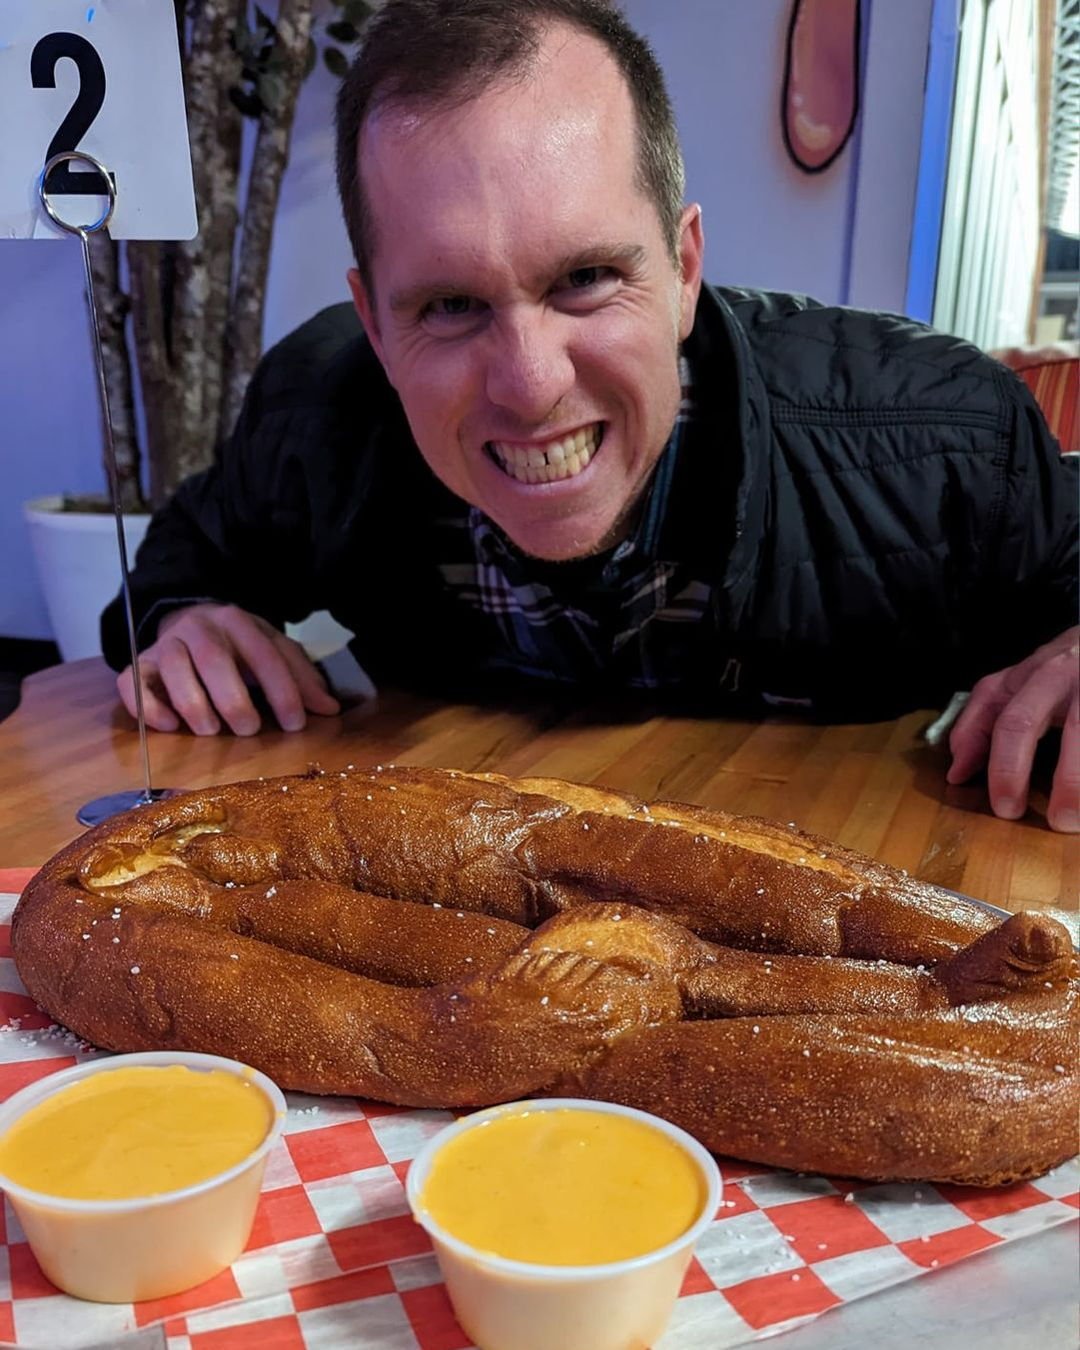 📸 It's National Pretzel Day and we're all about our King Kong Pretzel today at Gourmeltz! Got a pic with our legendary pretzel? We'd love to see how you tackled it!

Share your photos with us using #KingKongPretzel and we might just feature you on o